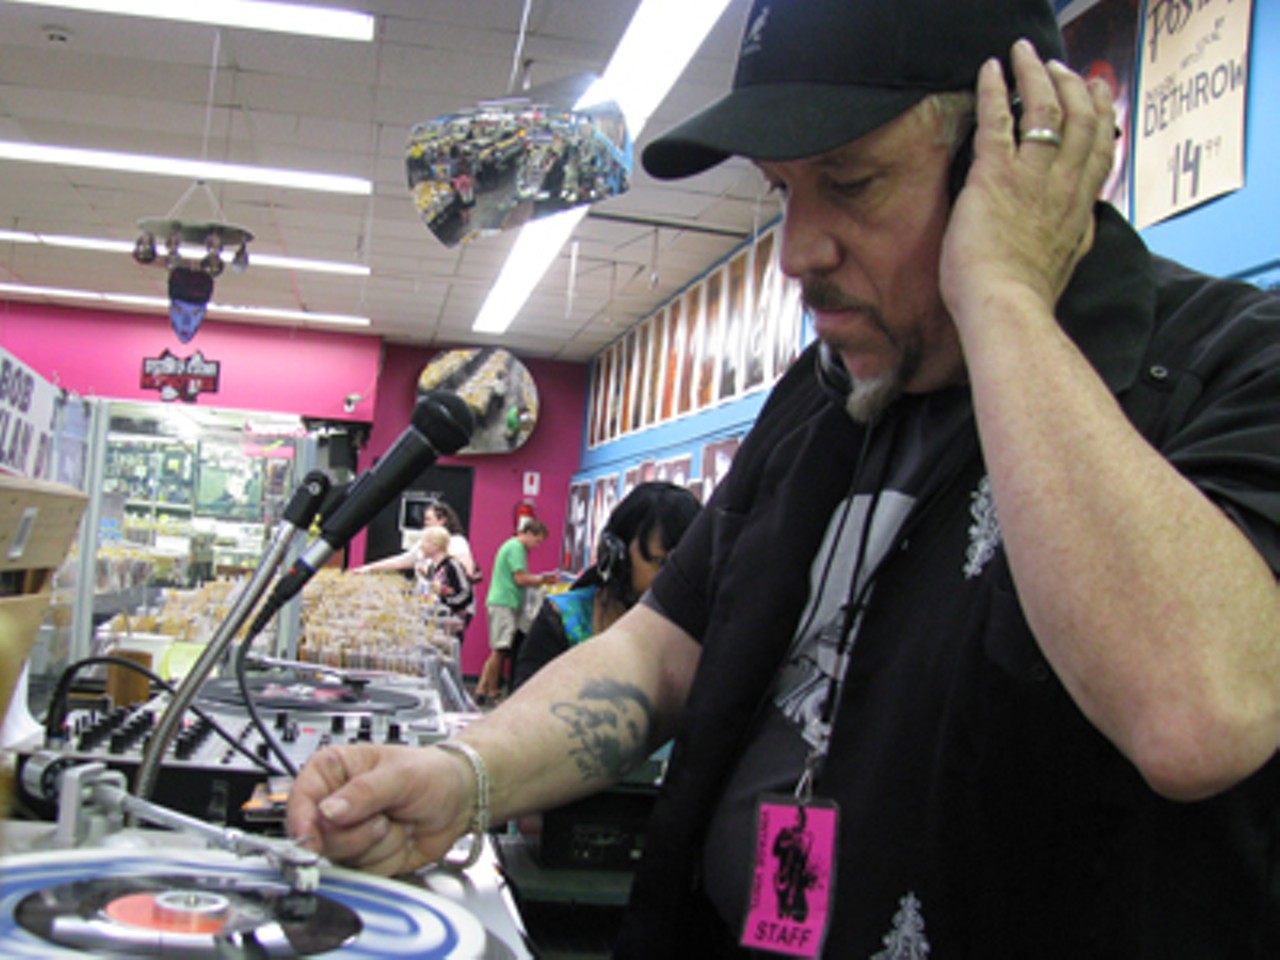 Vintage Vinyl co-owner Tom "Papa" Ray DJ'd some soul/reggae favorites for customers, one of many guest DJ's.